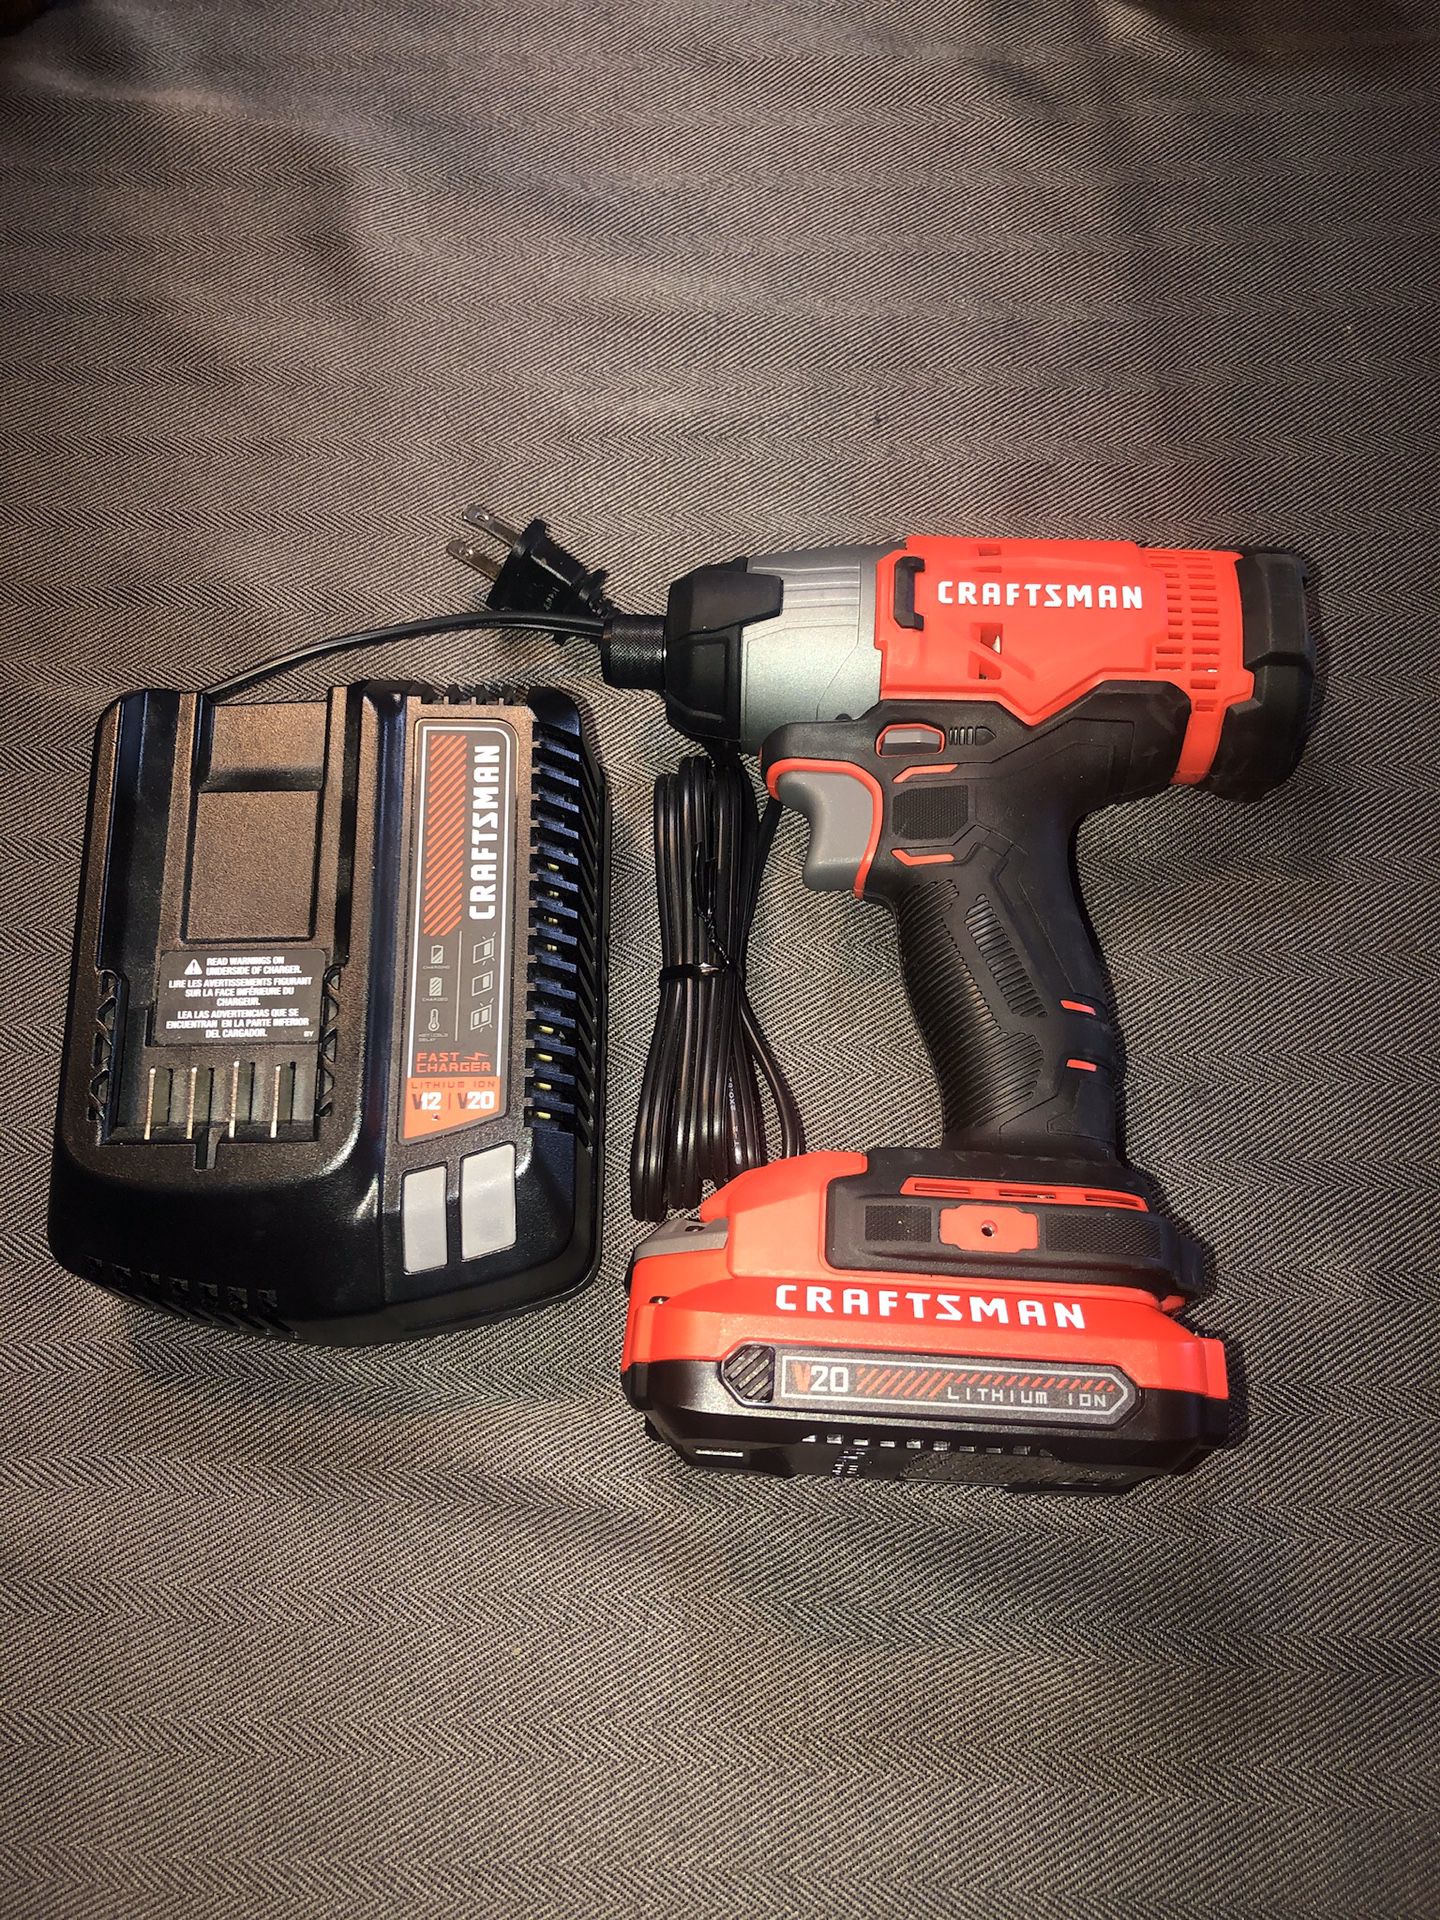 Craftsman 20v impact drill one battery and charger